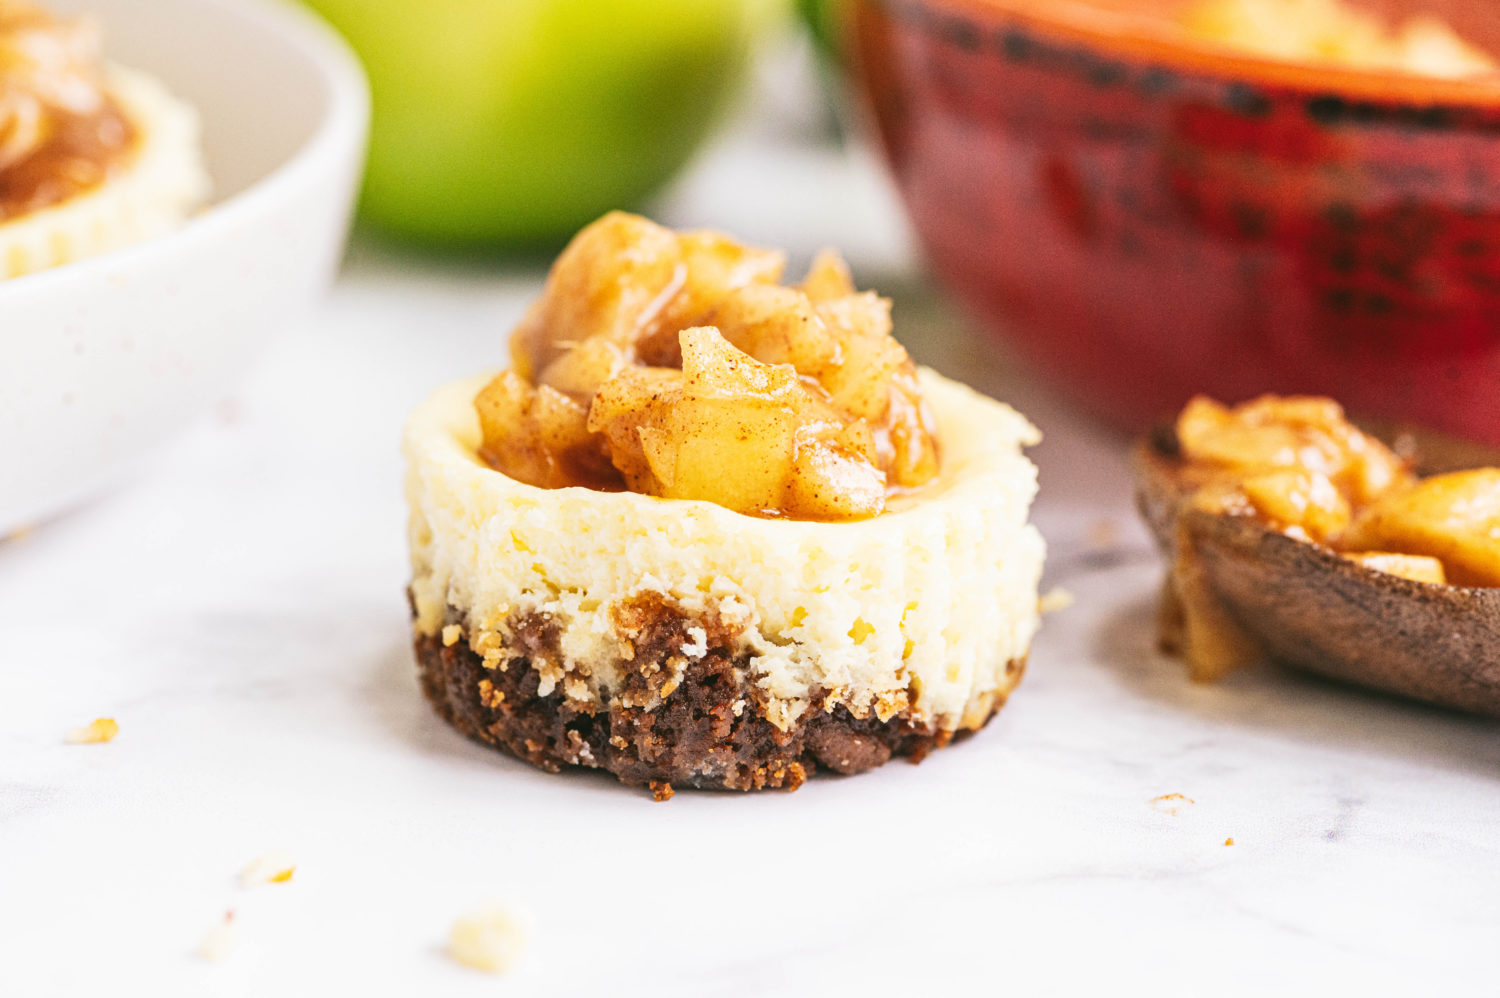 spiced apple cheesecake bite is pictured topped with cinnamon apples